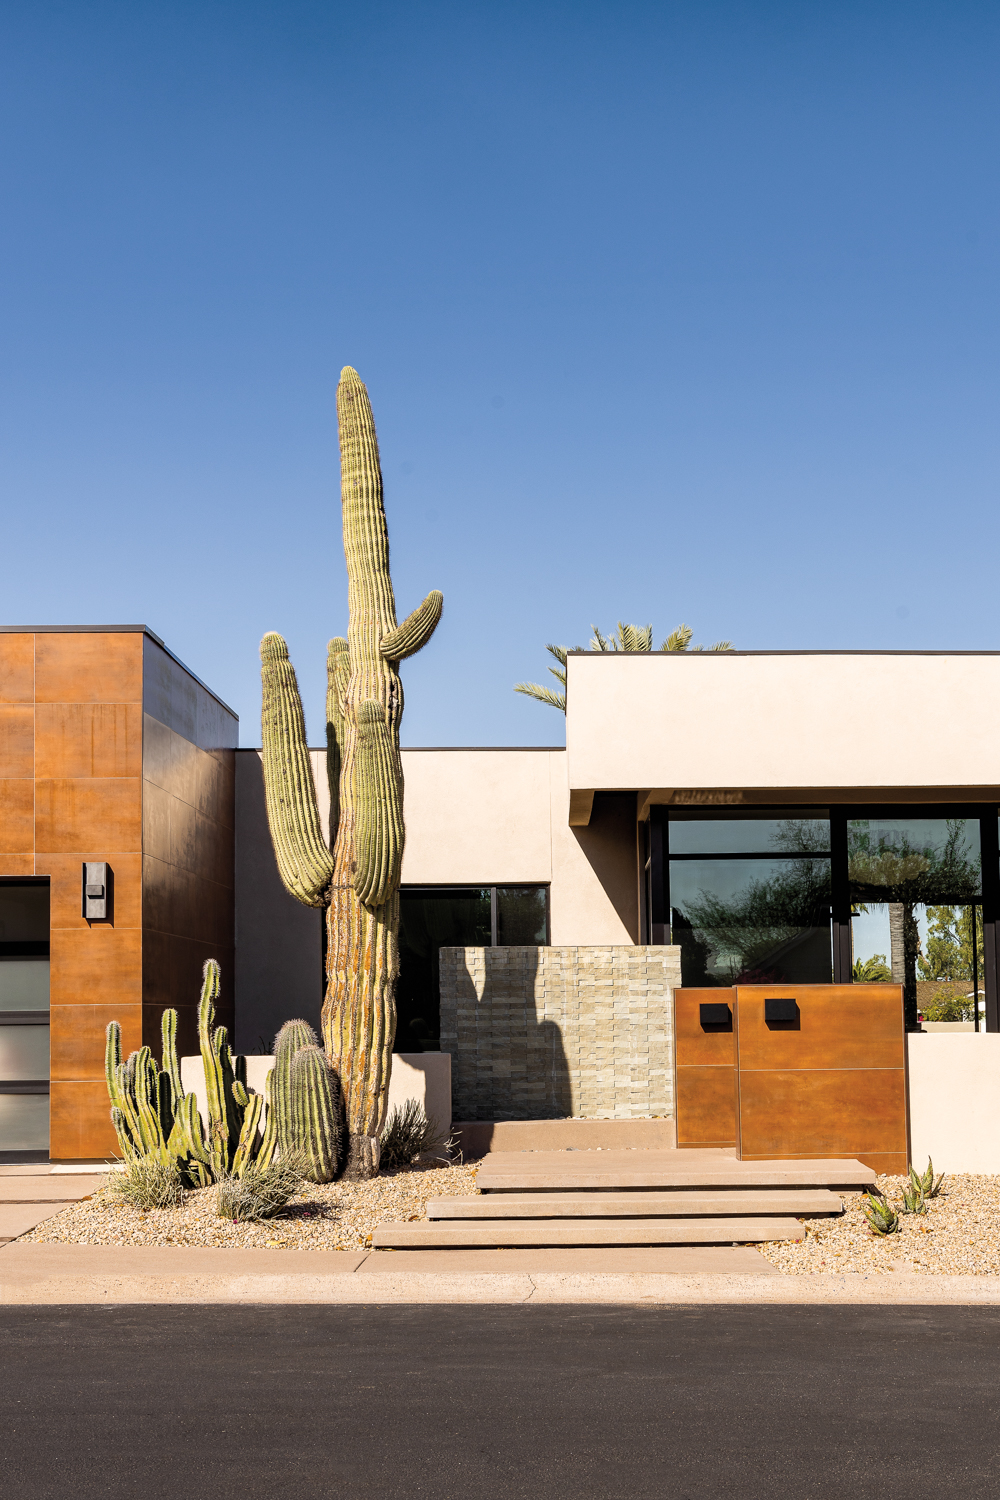 The exterior of a modern home clad in rust-colored porcelain tile and cacti in the yard